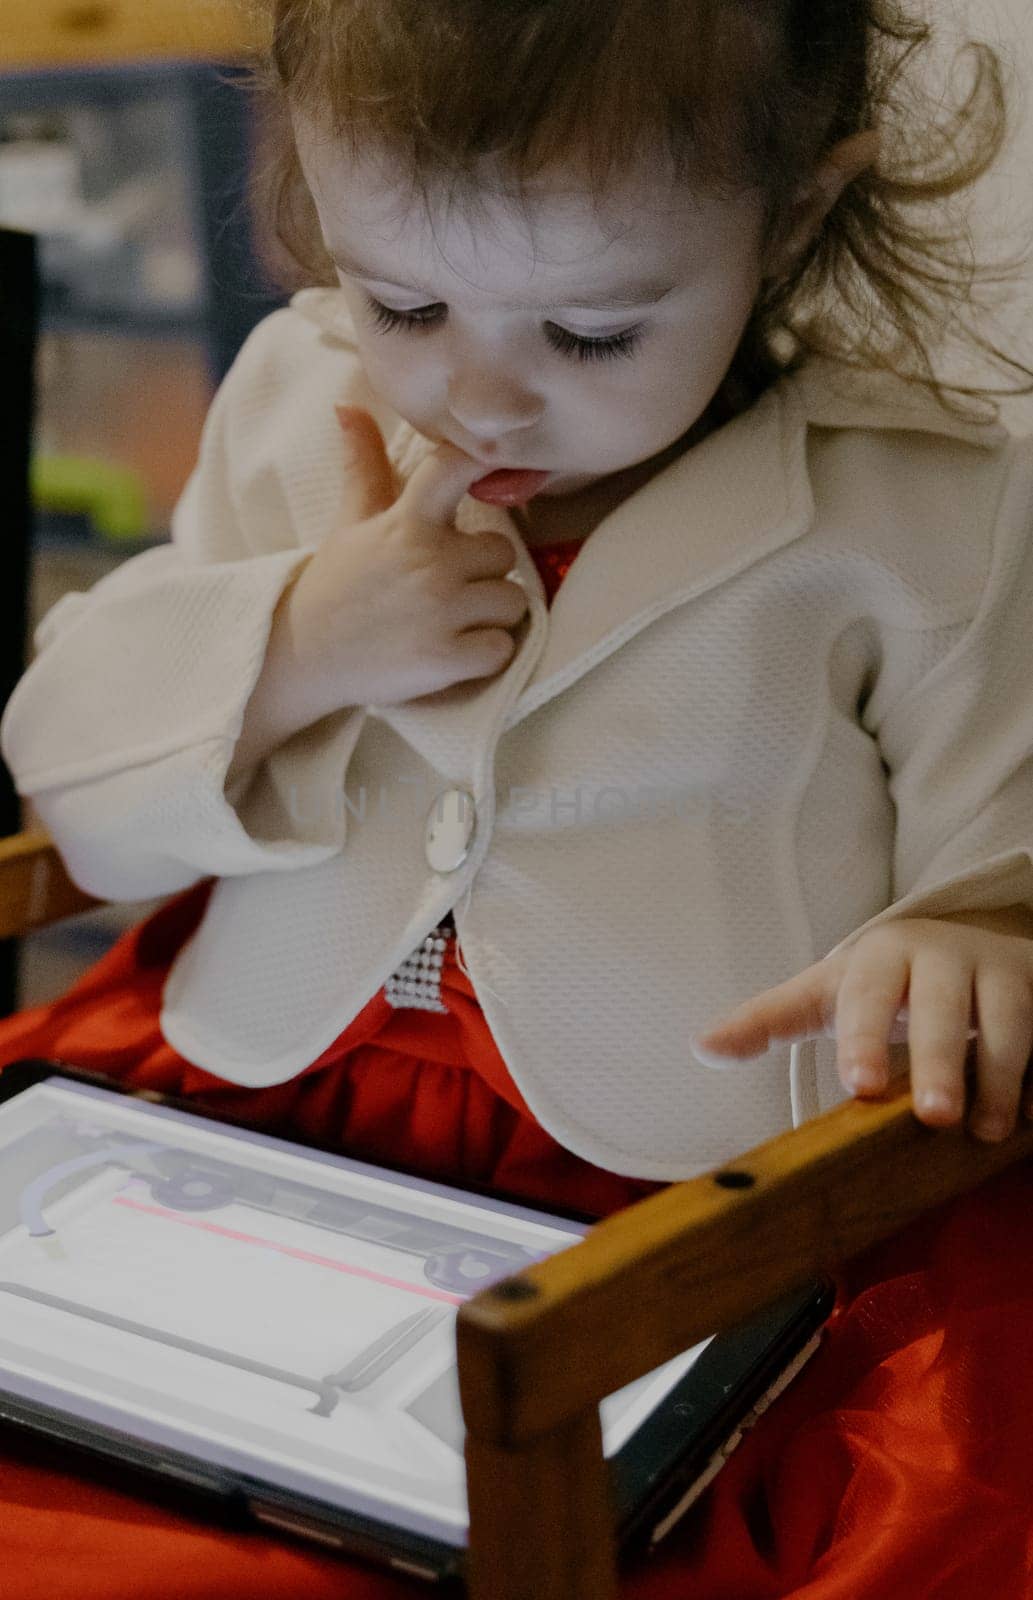 Portrait of one little Caucasian baby girl holding her finger in her mouth and looking down at a tablet with a cartoon, sitting on a wooden children's chair, close-up side view.